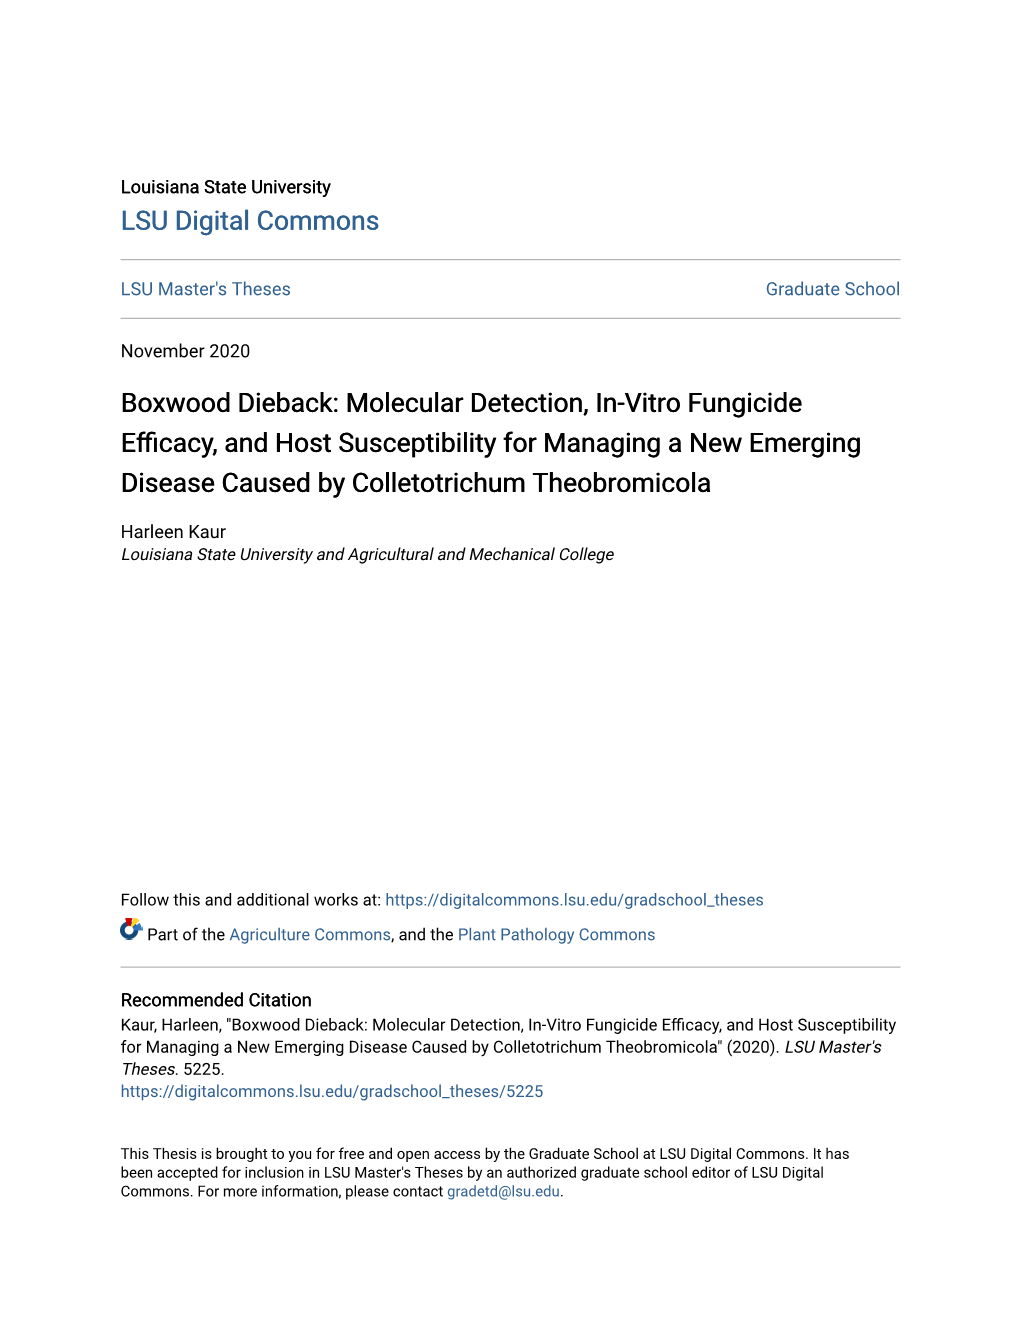 Boxwood Dieback: Molecular Detection, In-Vitro Fungicide Efficacy, and Host Susceptibility for Managing a New Emerging Disease Caused by Colletotrichum Theobromicola